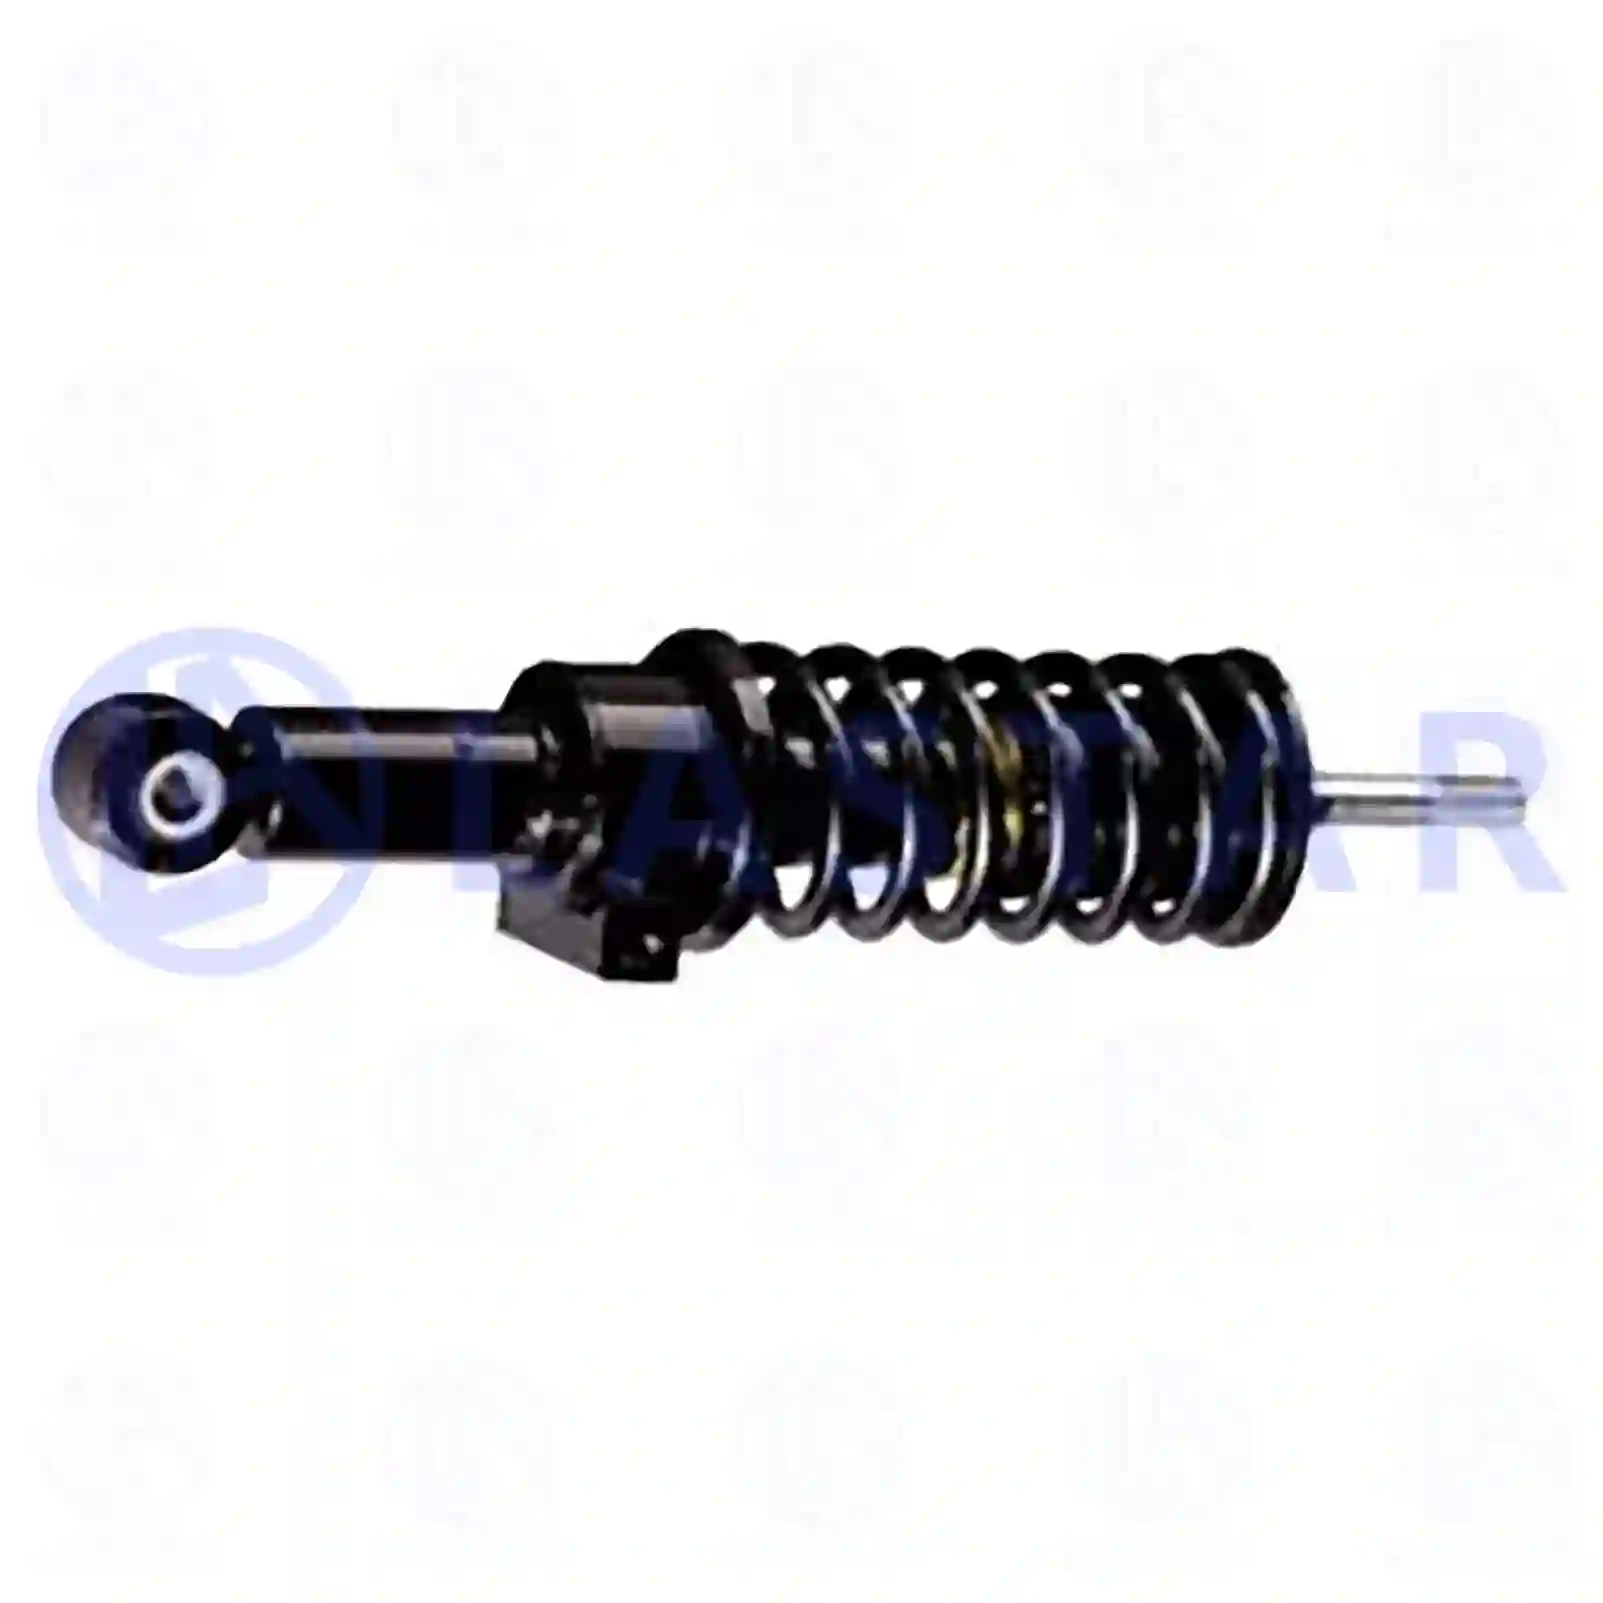 Cabin shock absorber, 77735600, 500307352, 500307353, 500307354, 500353511, 500353513, 500379694, 500379696, 98473215, 99438384, 99455909, 99455910 ||  77735600 Lastar Spare Part | Truck Spare Parts, Auotomotive Spare Parts Cabin shock absorber, 77735600, 500307352, 500307353, 500307354, 500353511, 500353513, 500379694, 500379696, 98473215, 99438384, 99455909, 99455910 ||  77735600 Lastar Spare Part | Truck Spare Parts, Auotomotive Spare Parts